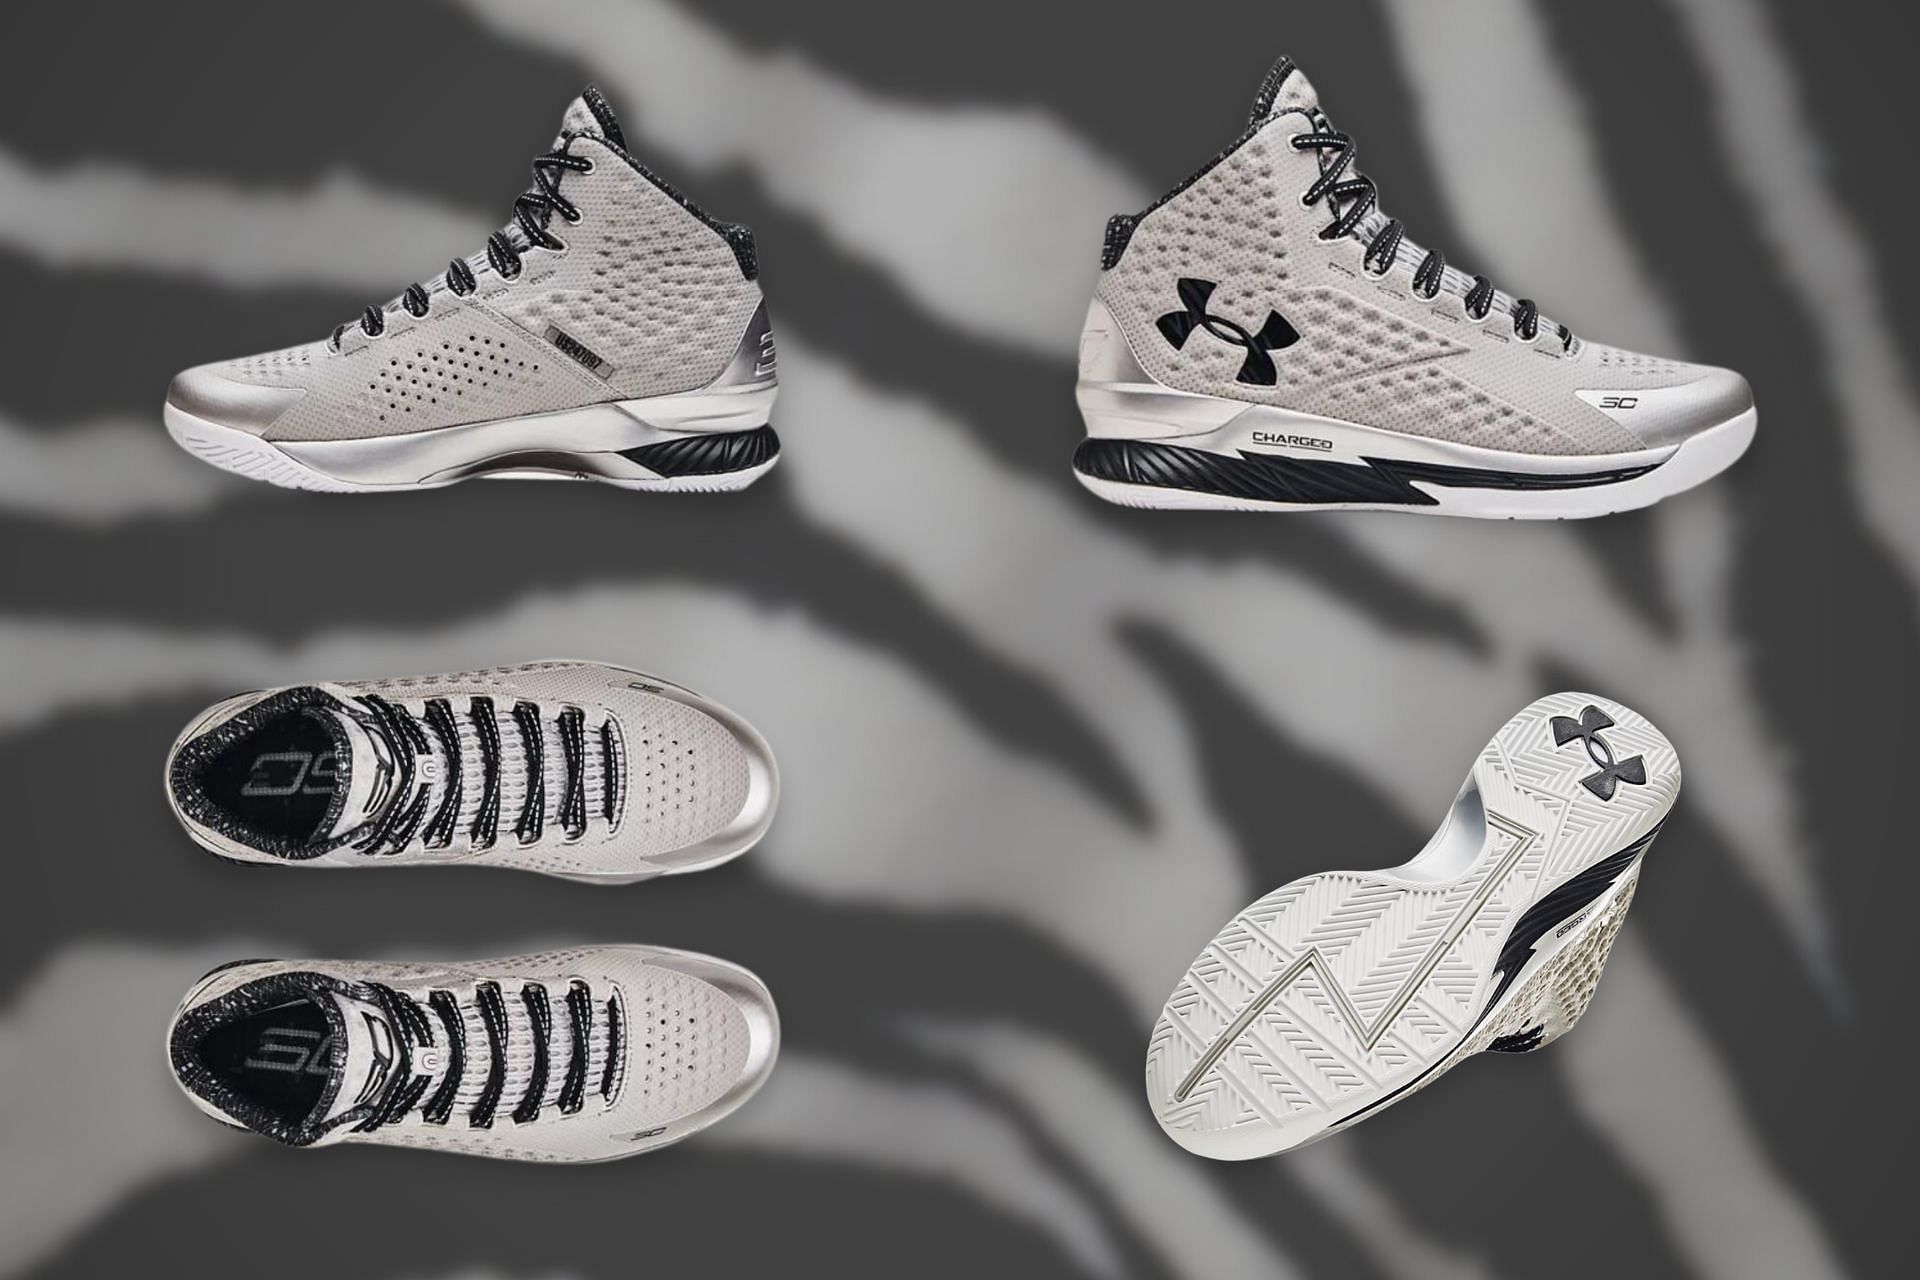 The newly released Stephen Curry x Under Armour Curry 1 &quot;Black History Month&quot; sneakers come clad in a Metallic Silver and Black color scheme (Image via Sportskeeda)